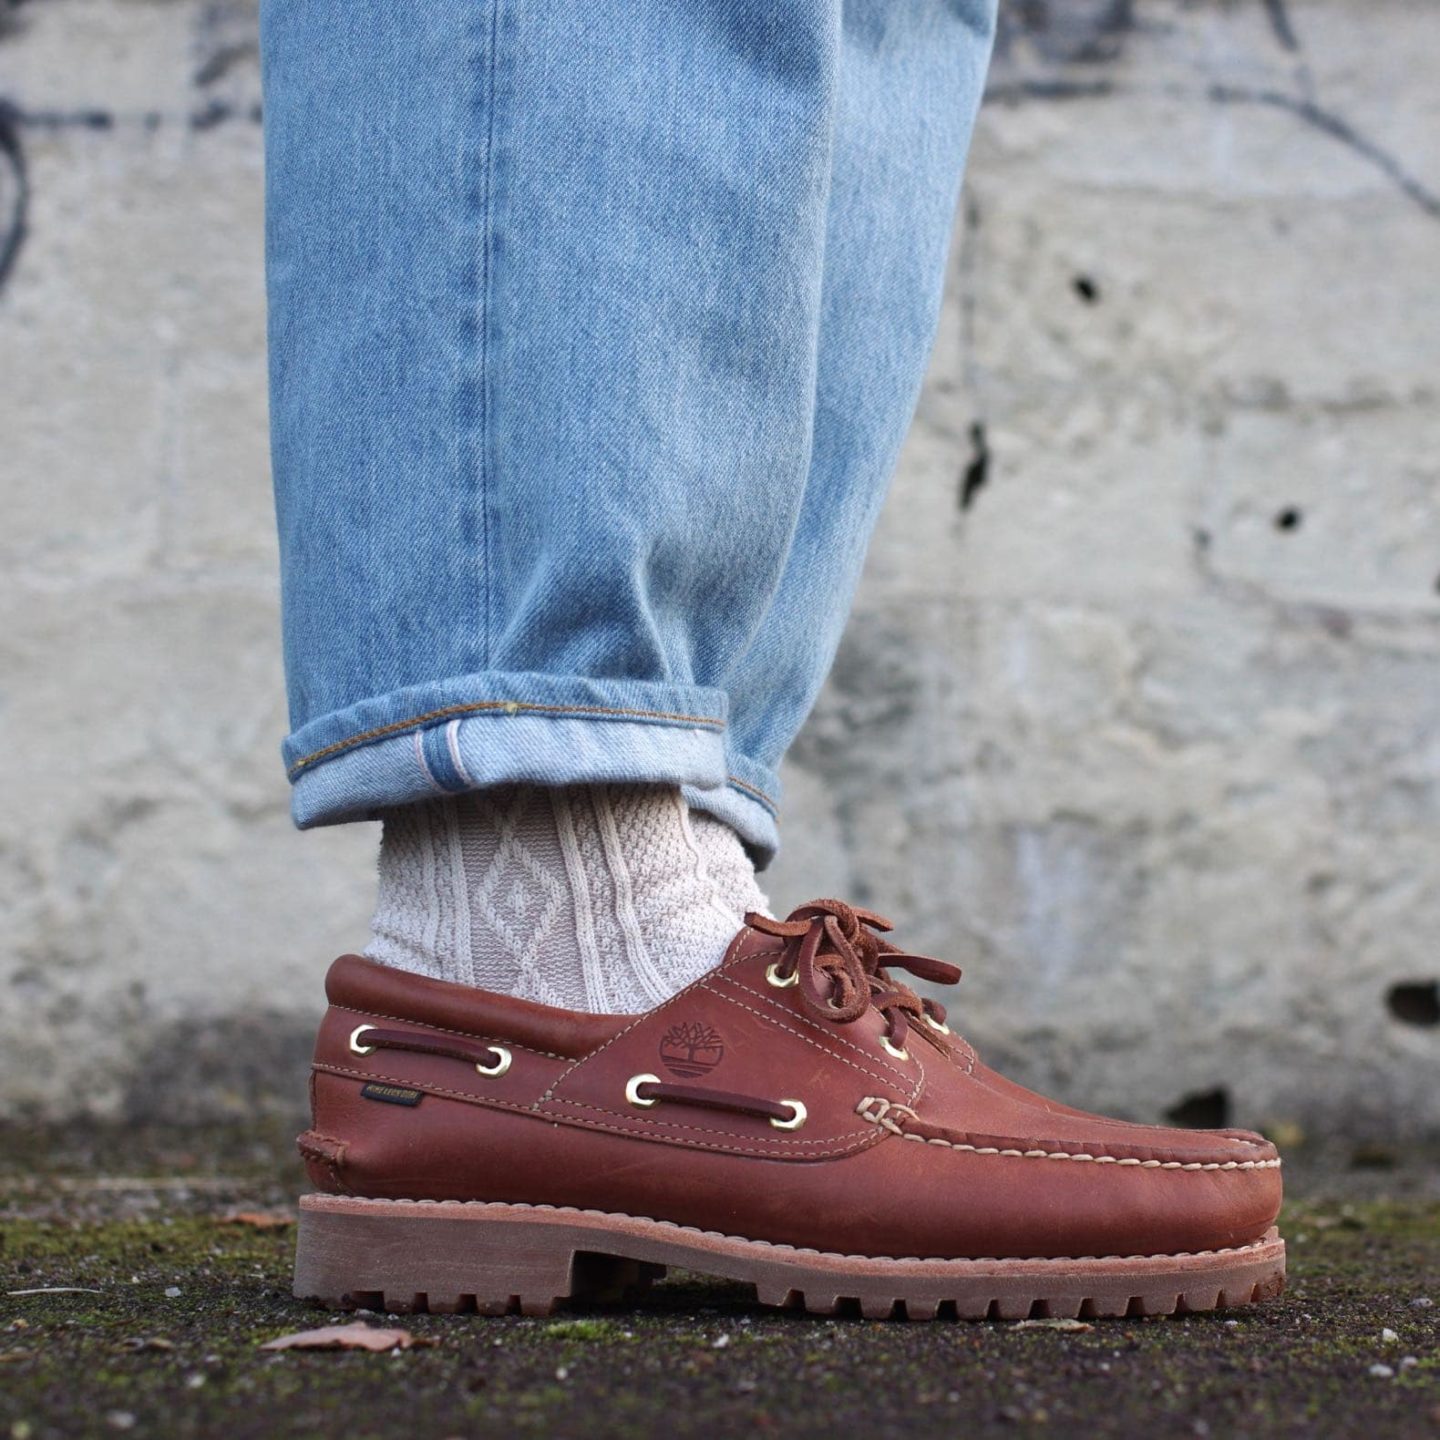 timberland x aime leon dore boat shoes